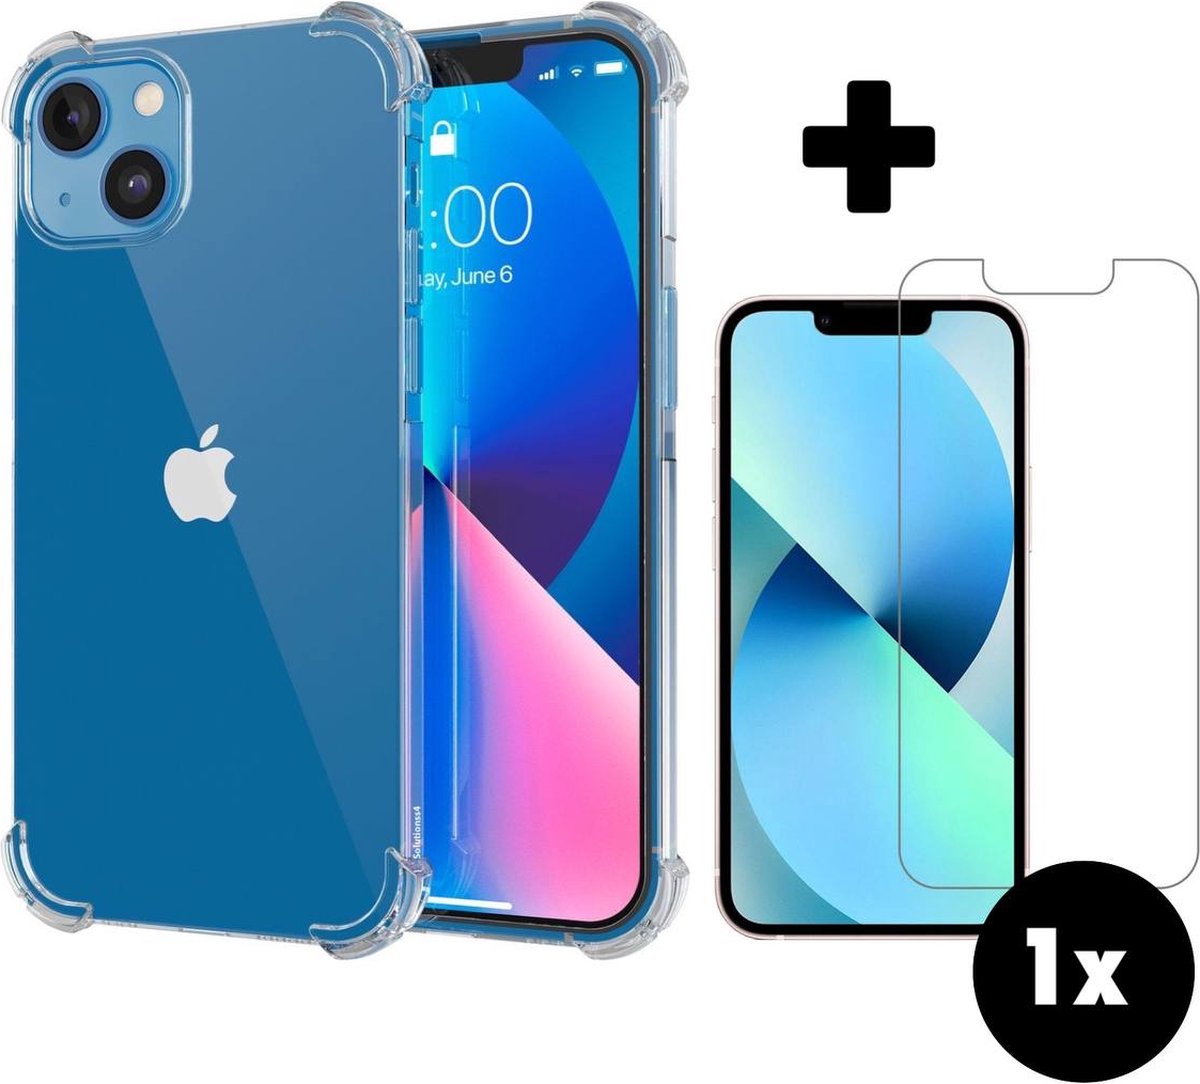 iPhone 13 Mini Hoesje Siliconen Shock Proof Case Transparant Met Screenprotector - iPhone 13 Mini Hoes Extra Stevig Hoesje Cover Met Screenprotector